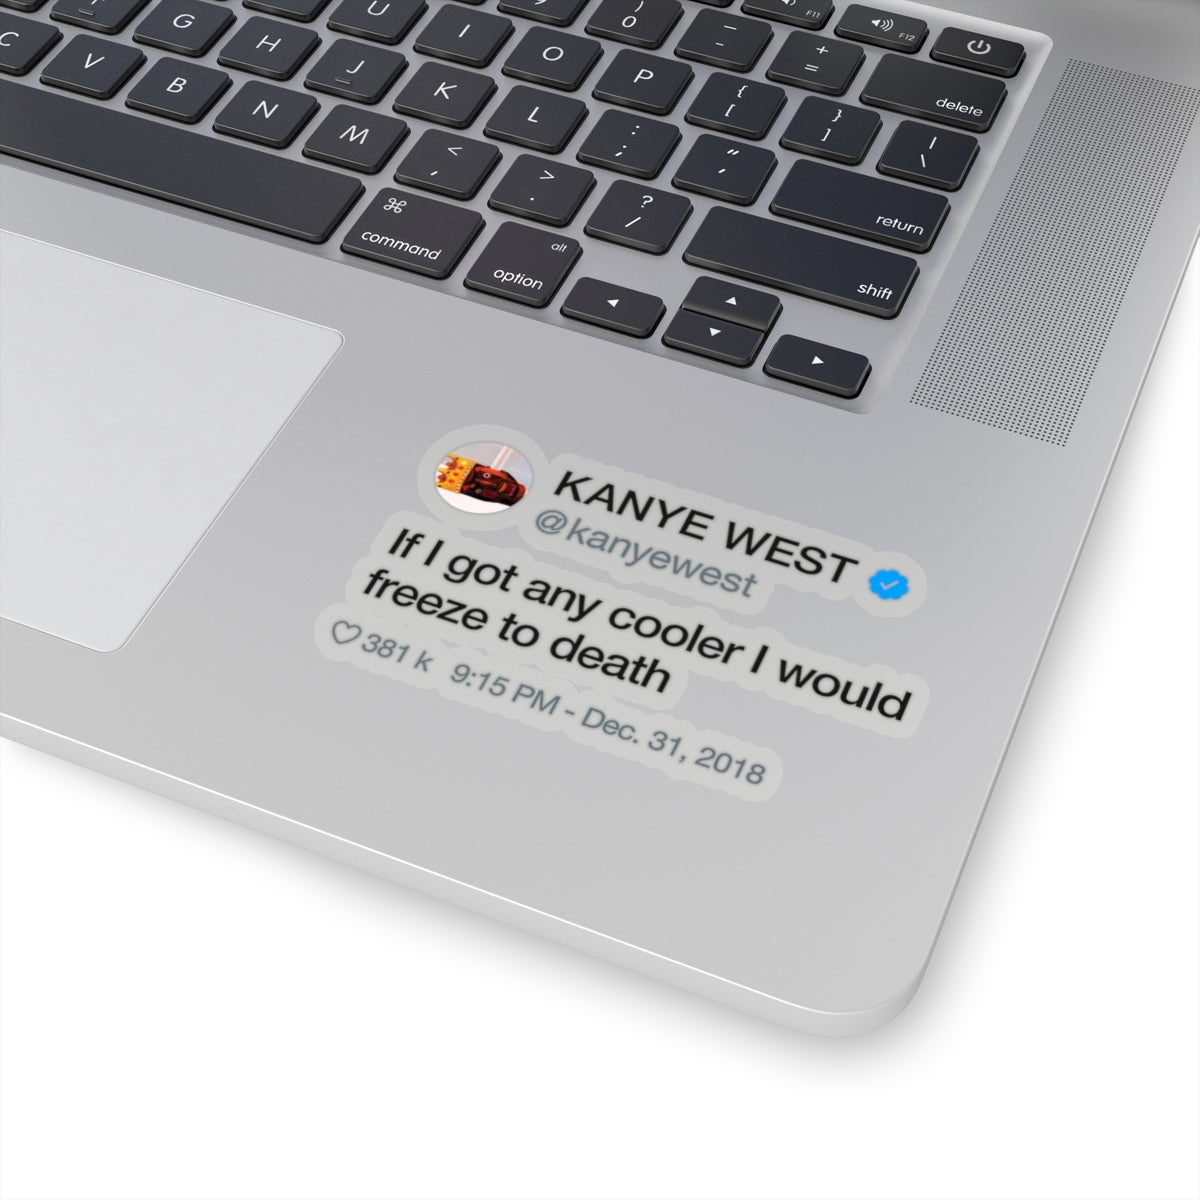 Kanye West Tweet quote If I got any cooler I would freeze to death Stickers-4x4"-Transparent-Archethype